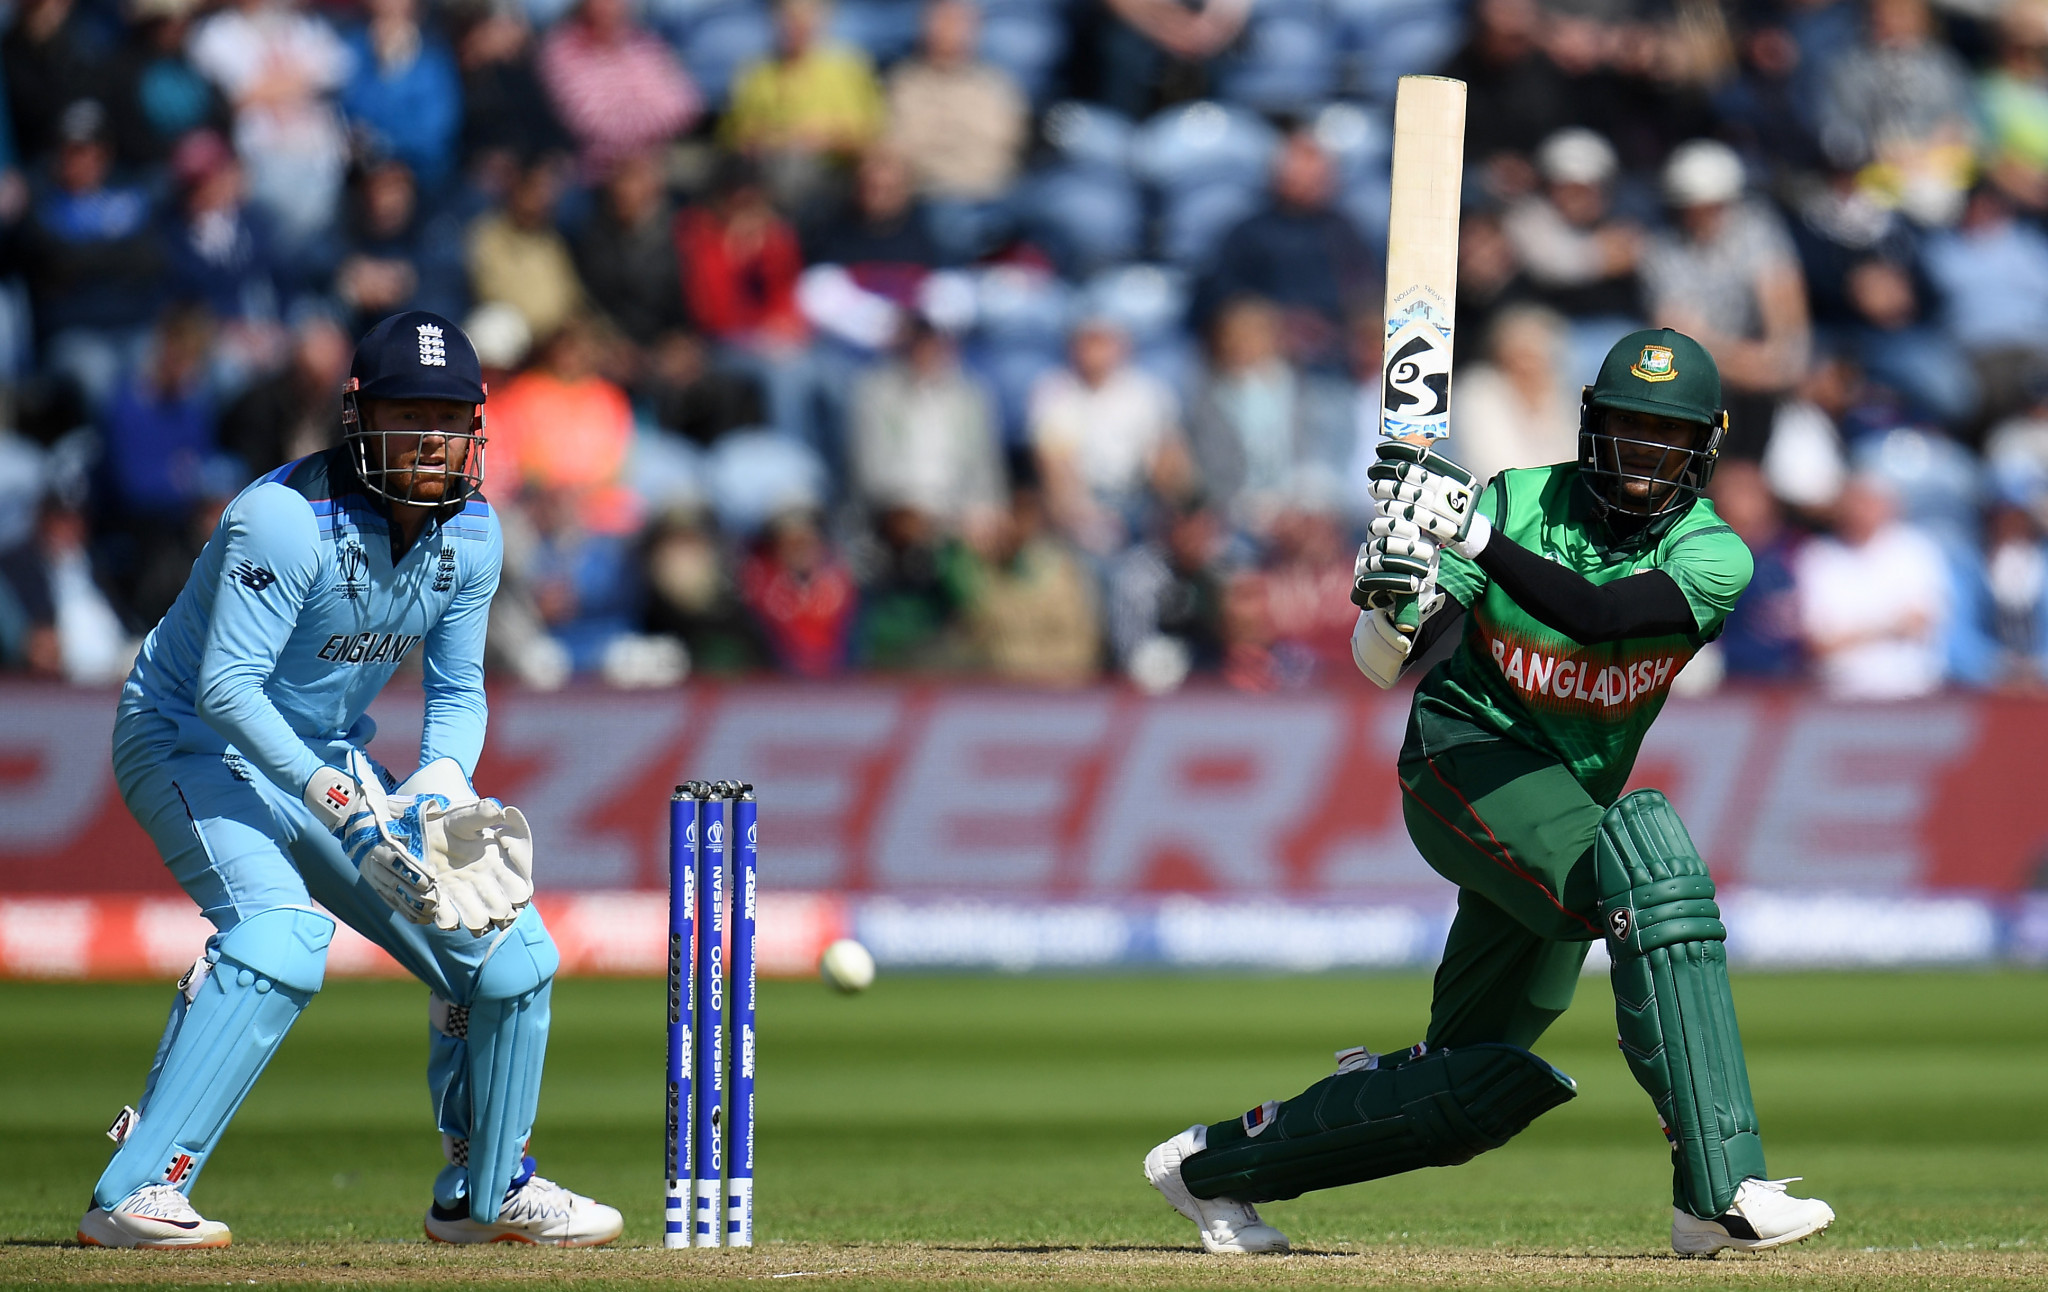 Shakib Al Hasan's 121 was in vain as England won by 106 runs ©Getty Images